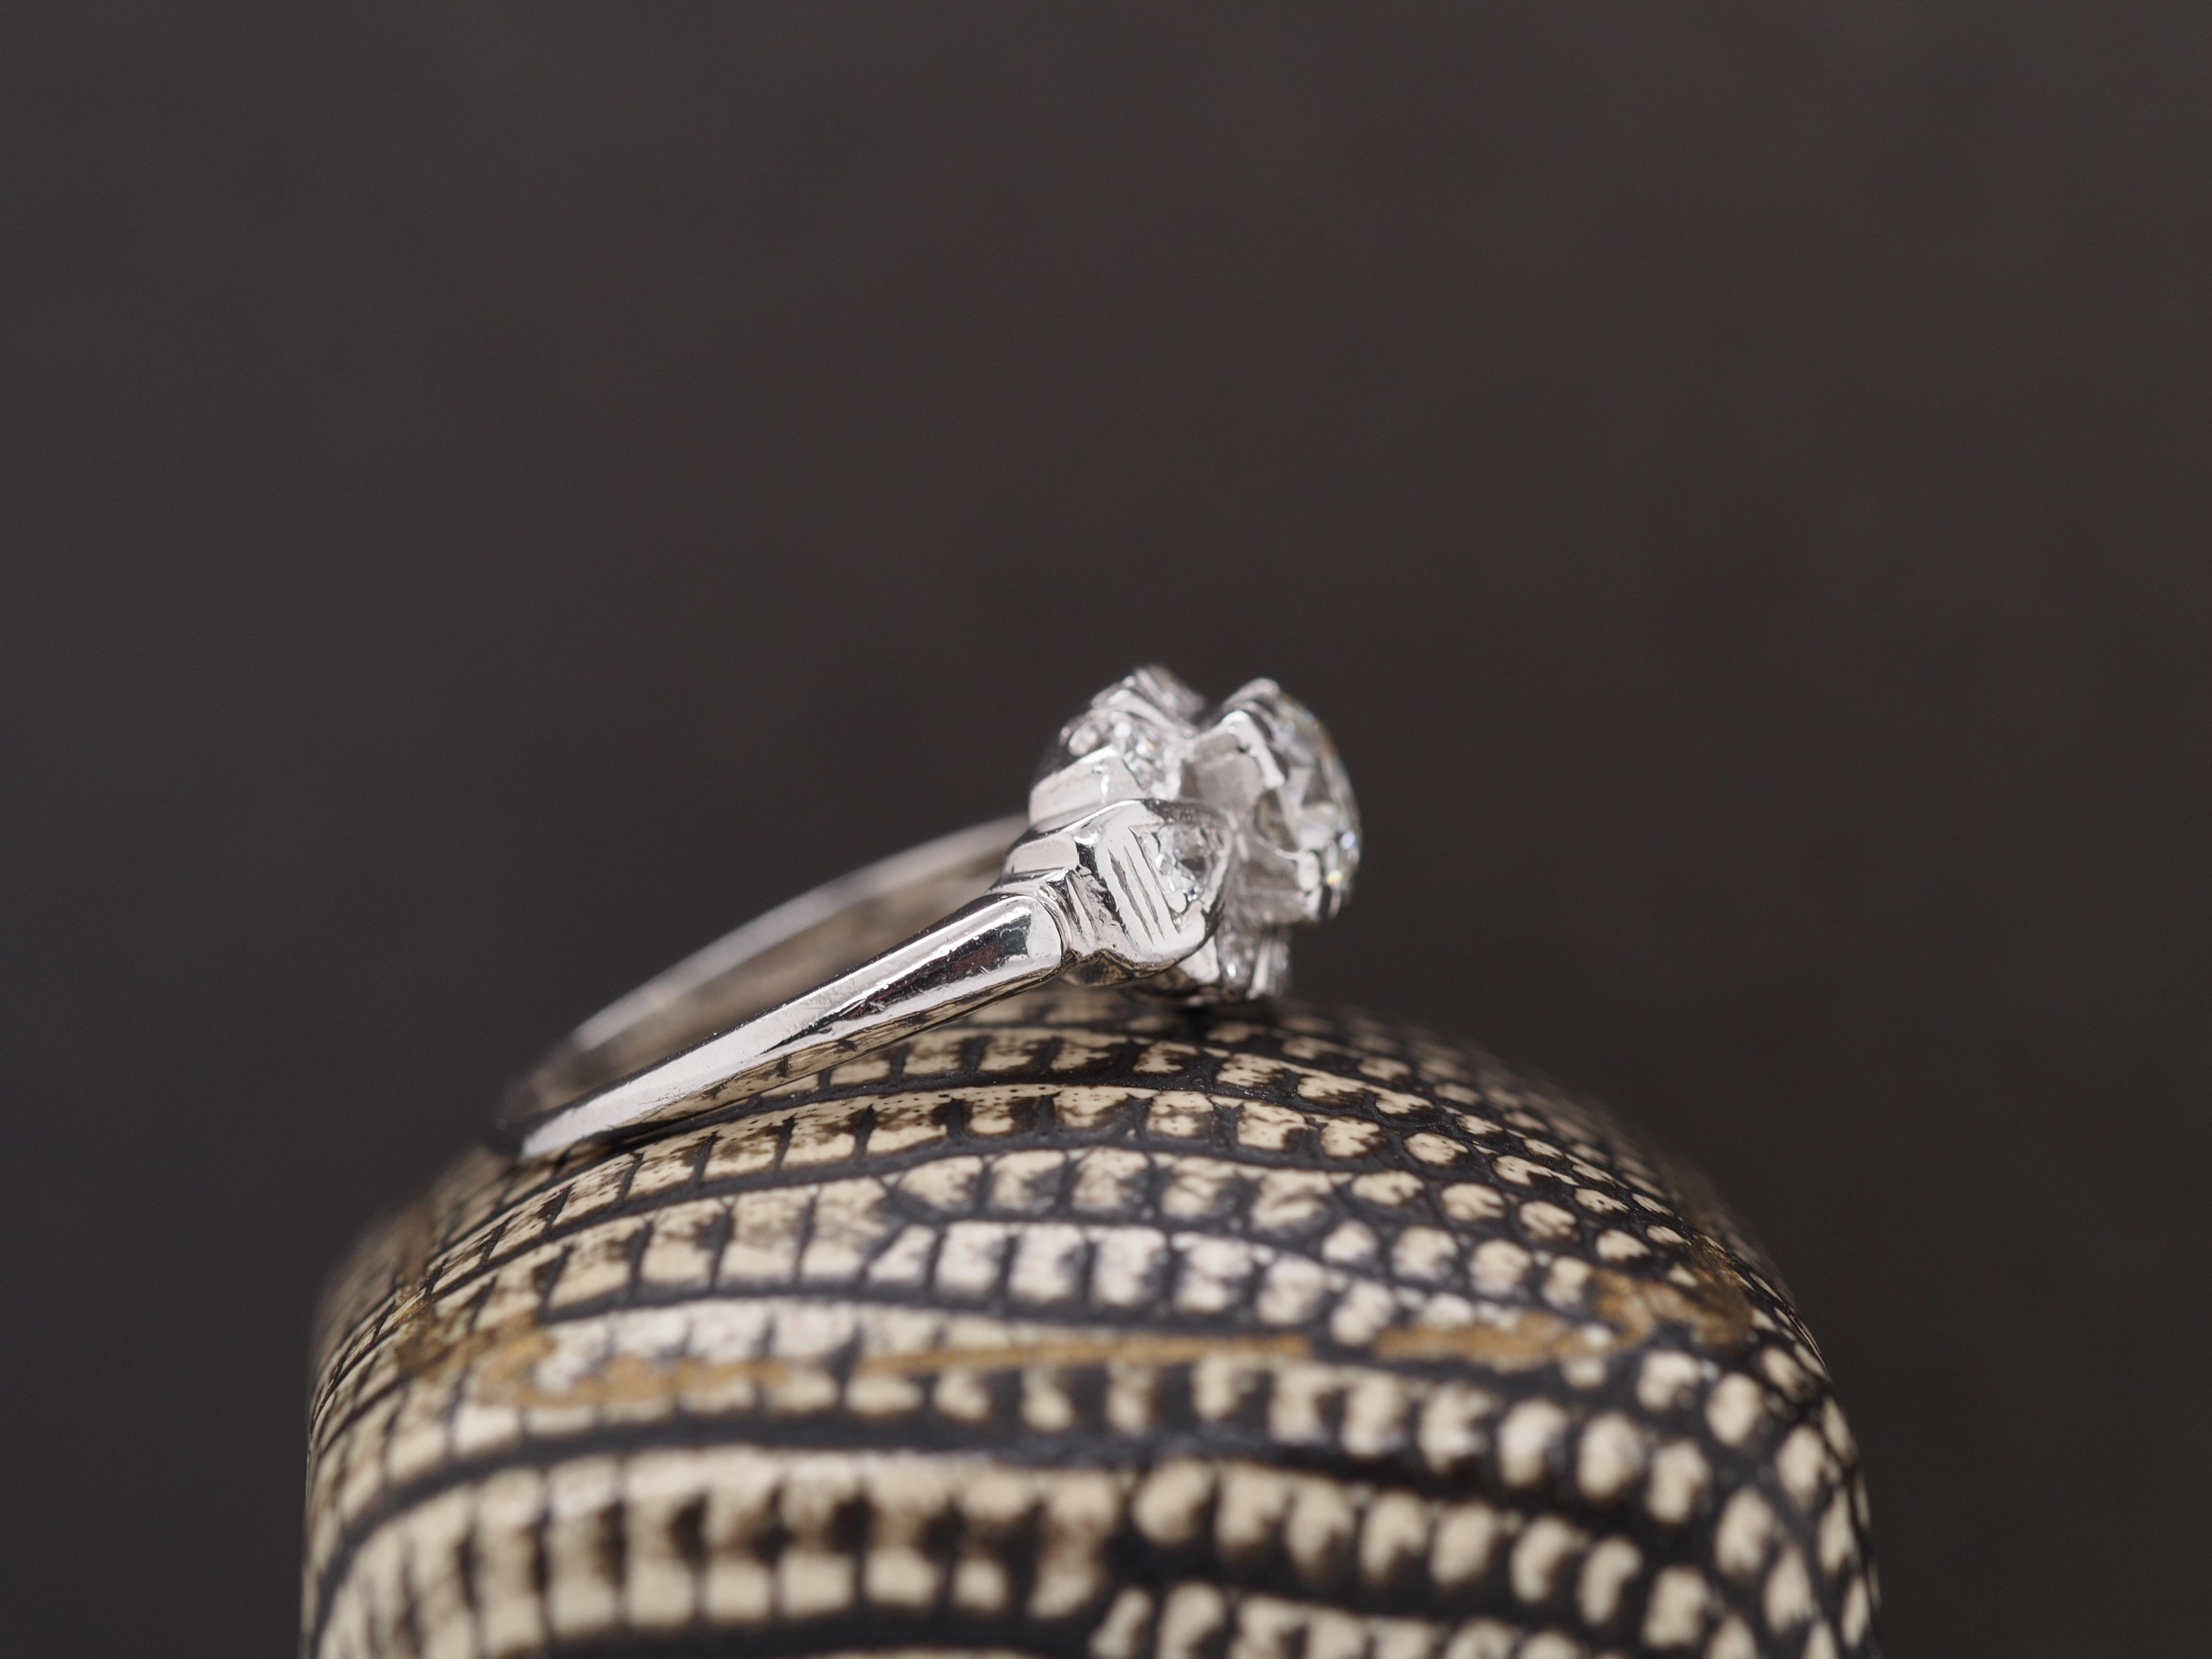 Year: 1930s

Item Details:
Ring Size: 5.8
Metal Type: Platinum [Hallmarked, and Tested]
Weight: 3.6 grams

Center Diamond Details:

.65ct Center Stone, Natural Diamonds, I Color, VS Clarity, Old European Brilliant Shape

Side Diamonds: .15ct total